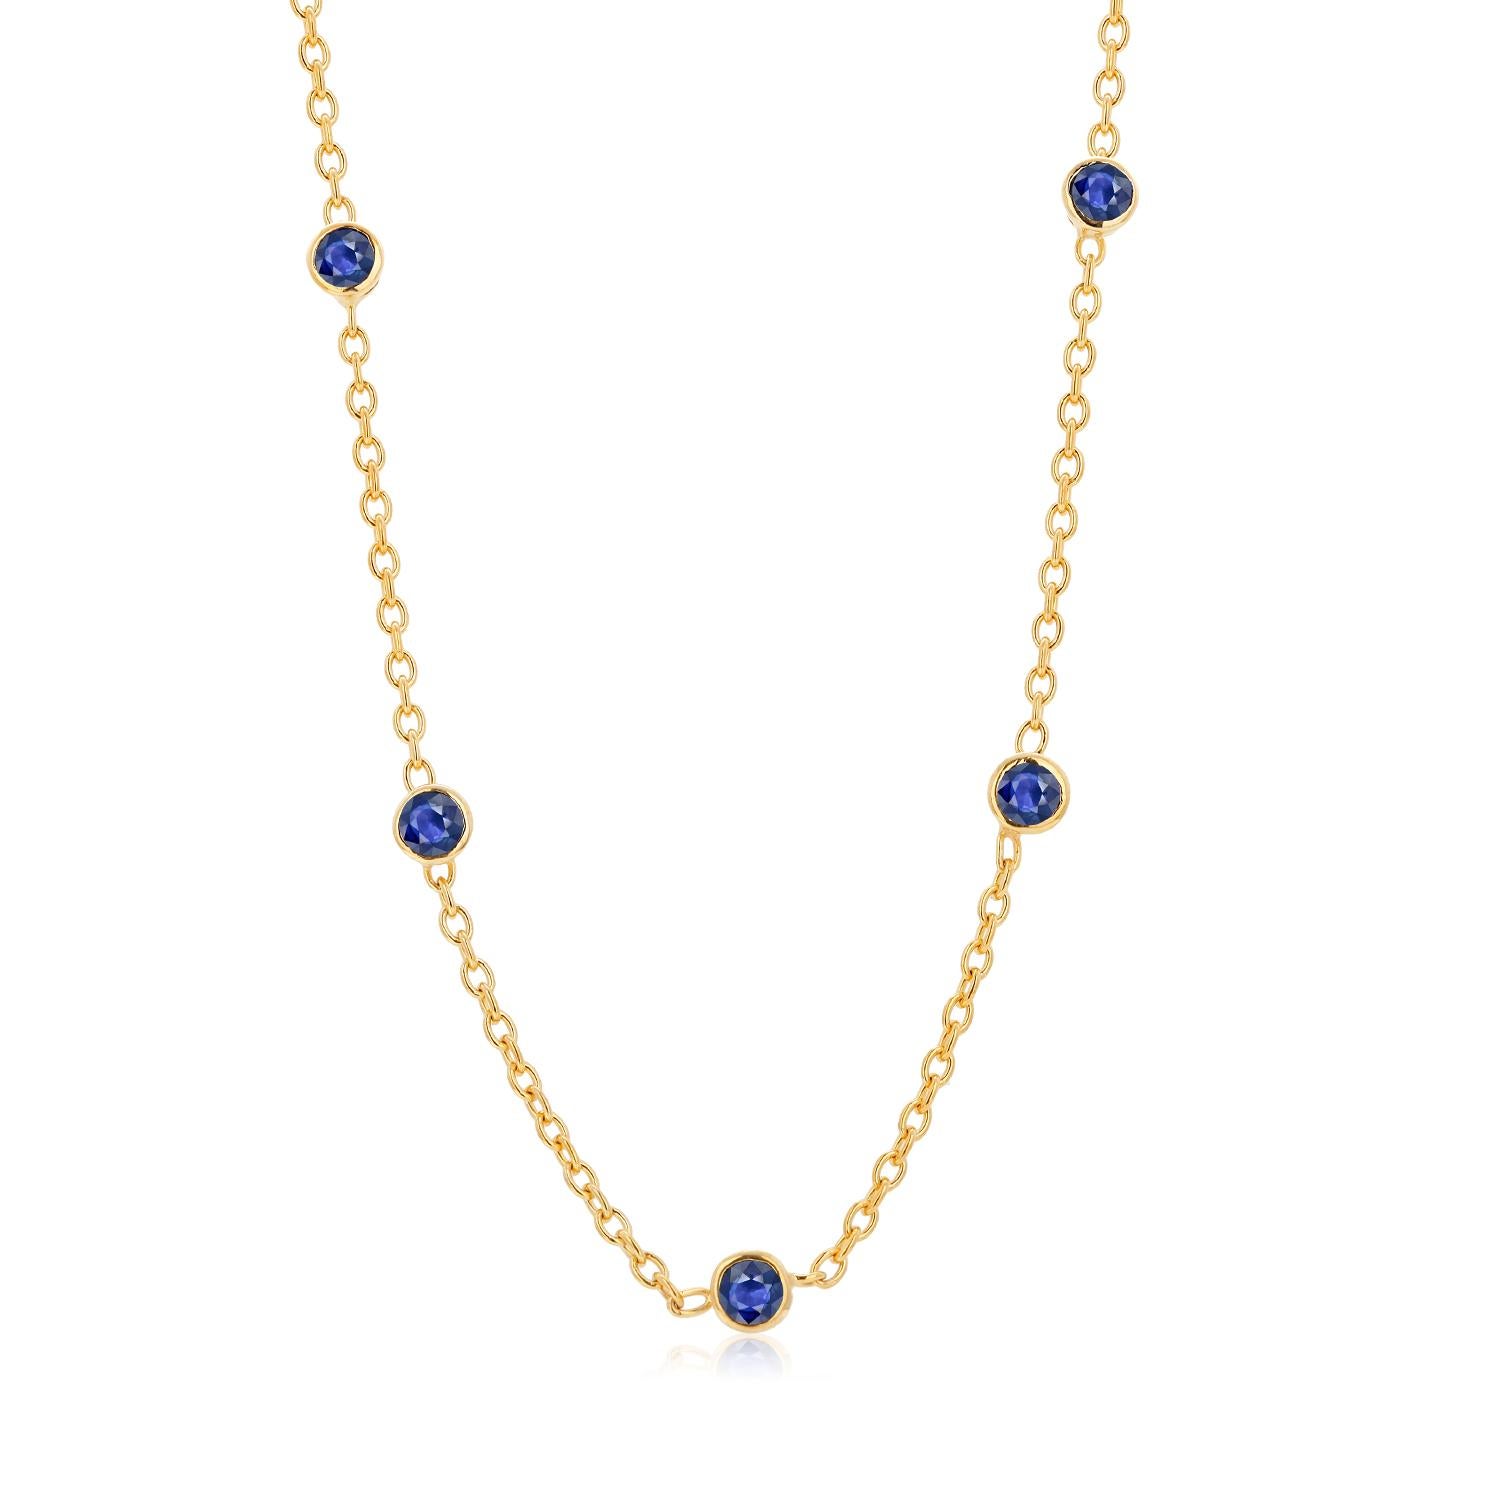 Round Cut Five Natural Blue Sapphire Bezel Necklace Sterling Silver Yellow Gold-Plated